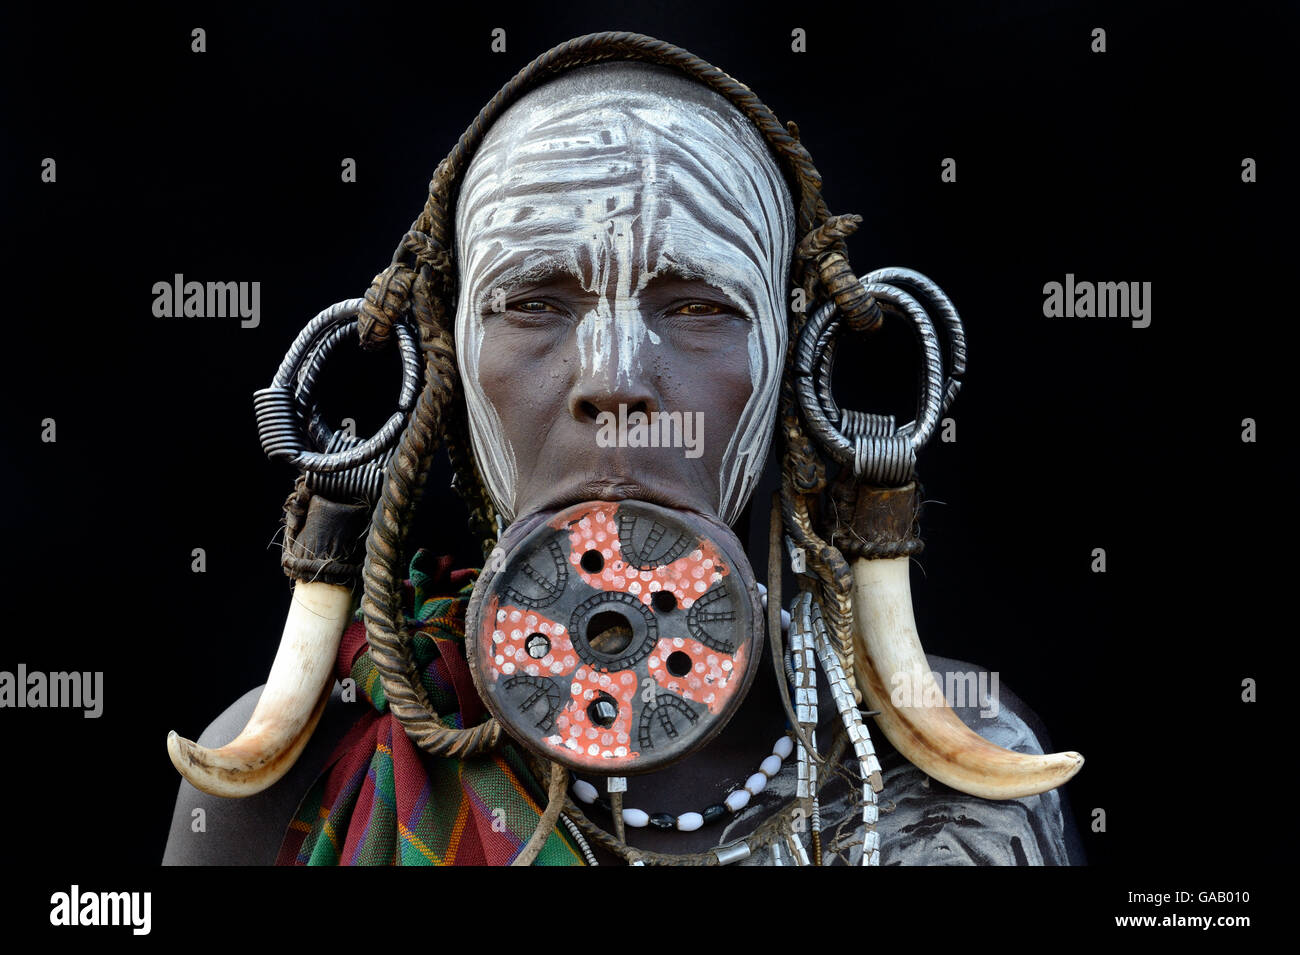 Portrait of woman from the Mursi tribe, traditionally decorated and painted, wearing a large clay lip plate, Omo Valley, Ethiopia, March 2015. Stock Photo